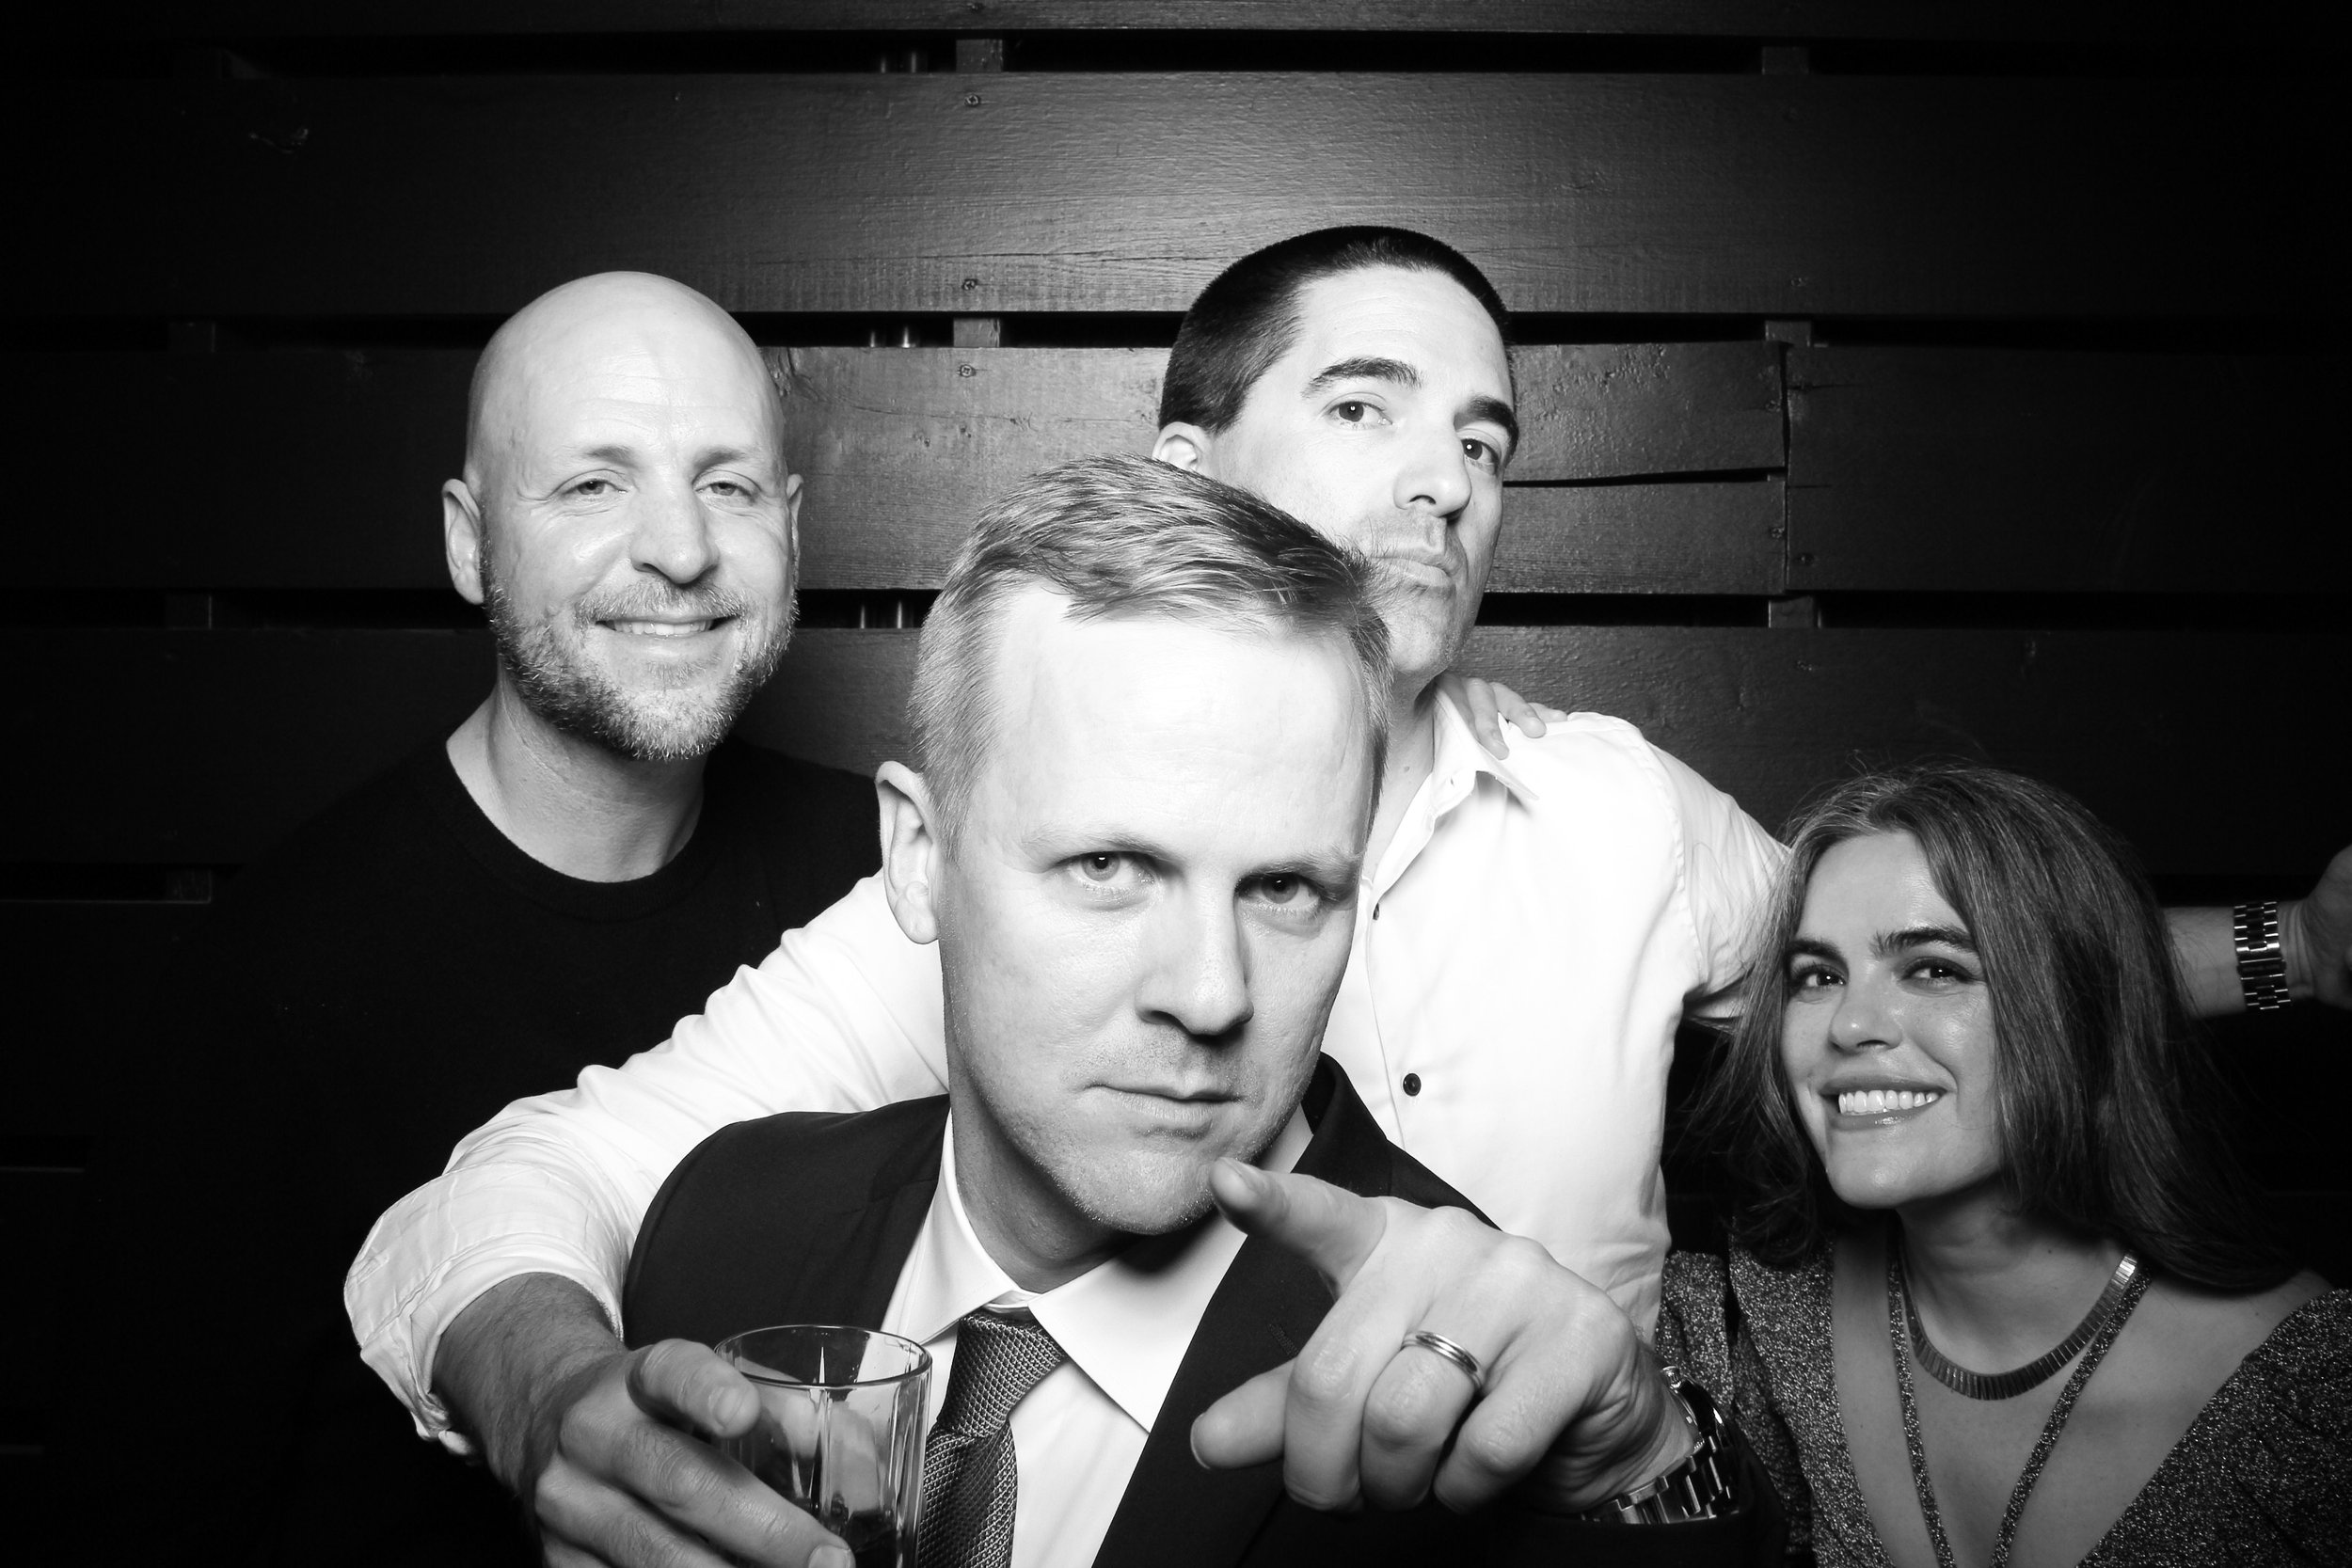 Fotio_Photo_Booth_Chicago_Winery_Clark_Street_Party_Family_Fun_Terrace_Superfans_River_North_18.jpg